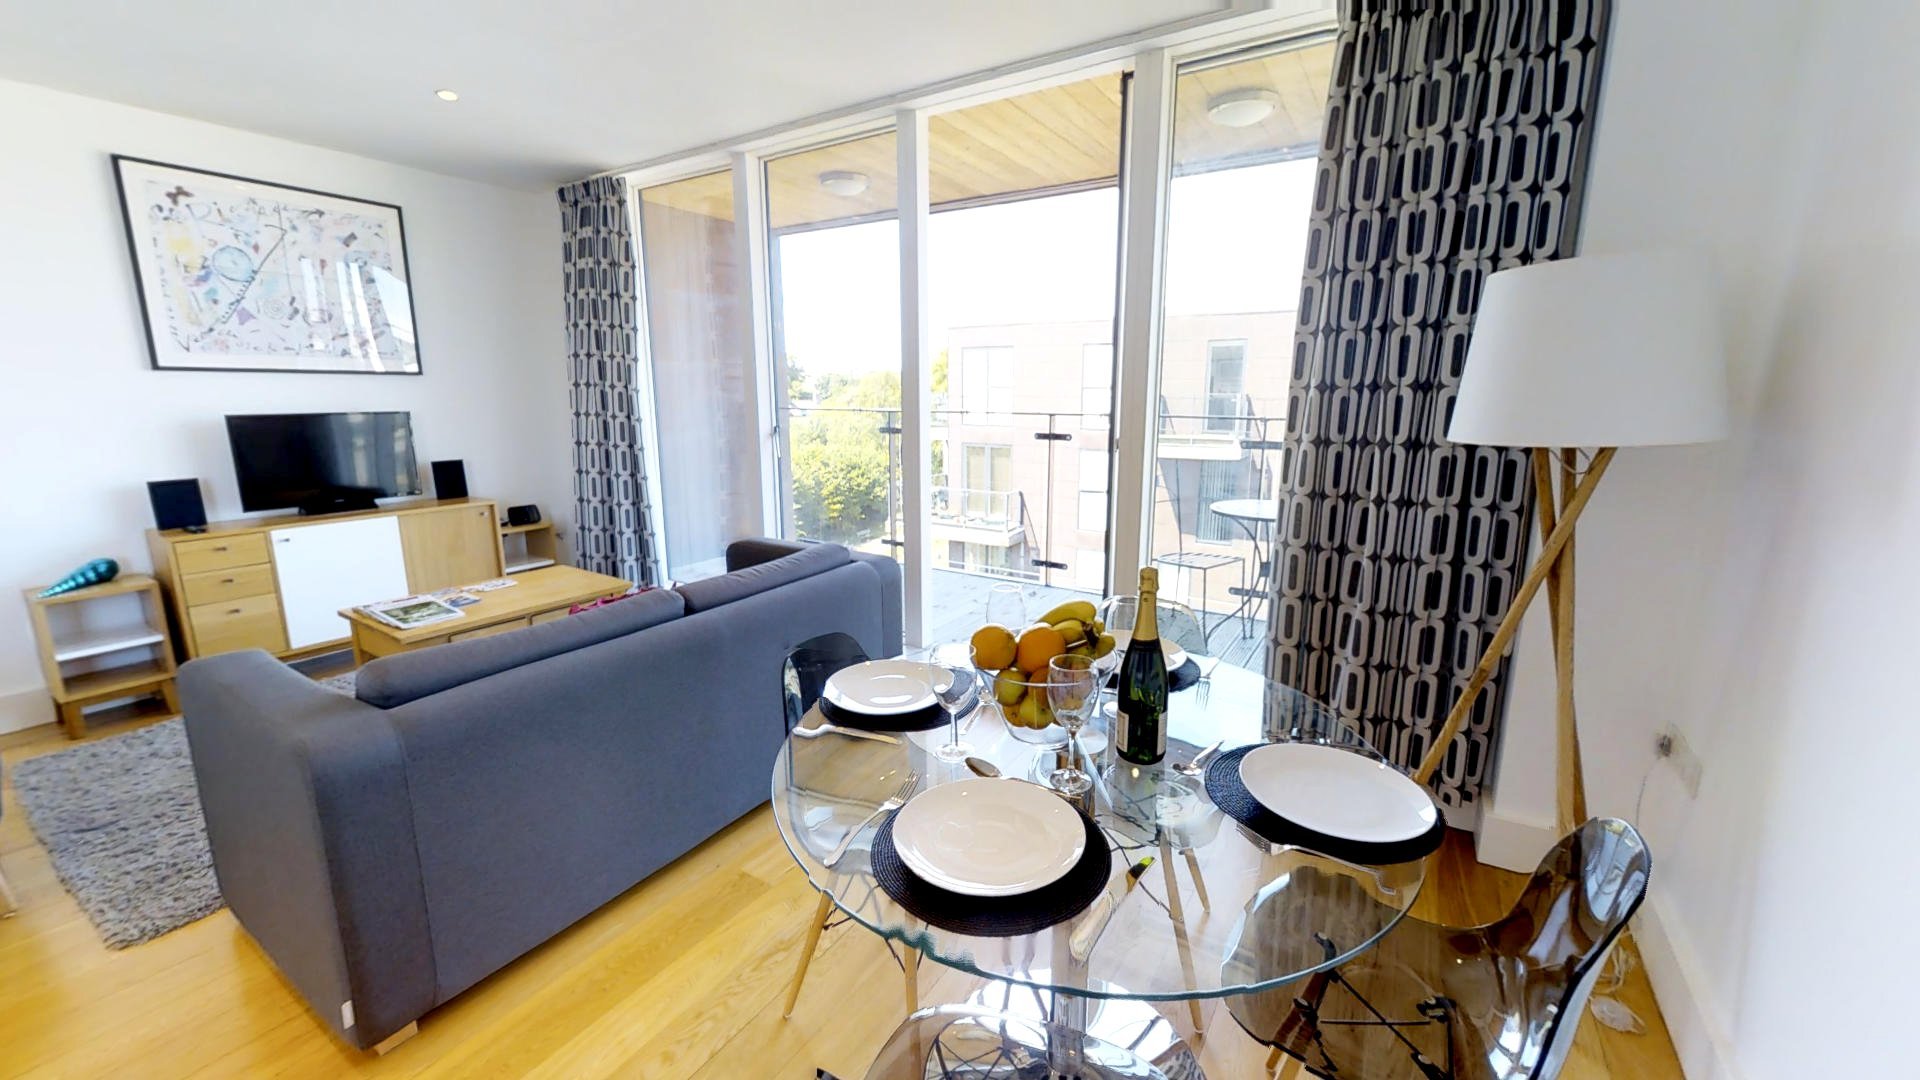 Serviced Accommodation Cambridge available for Short Lets Now! Book Urban Stay's Luxury Penthouse near Cambridge University! Free Cleaning, Wifi & Parking! | Urban Stay